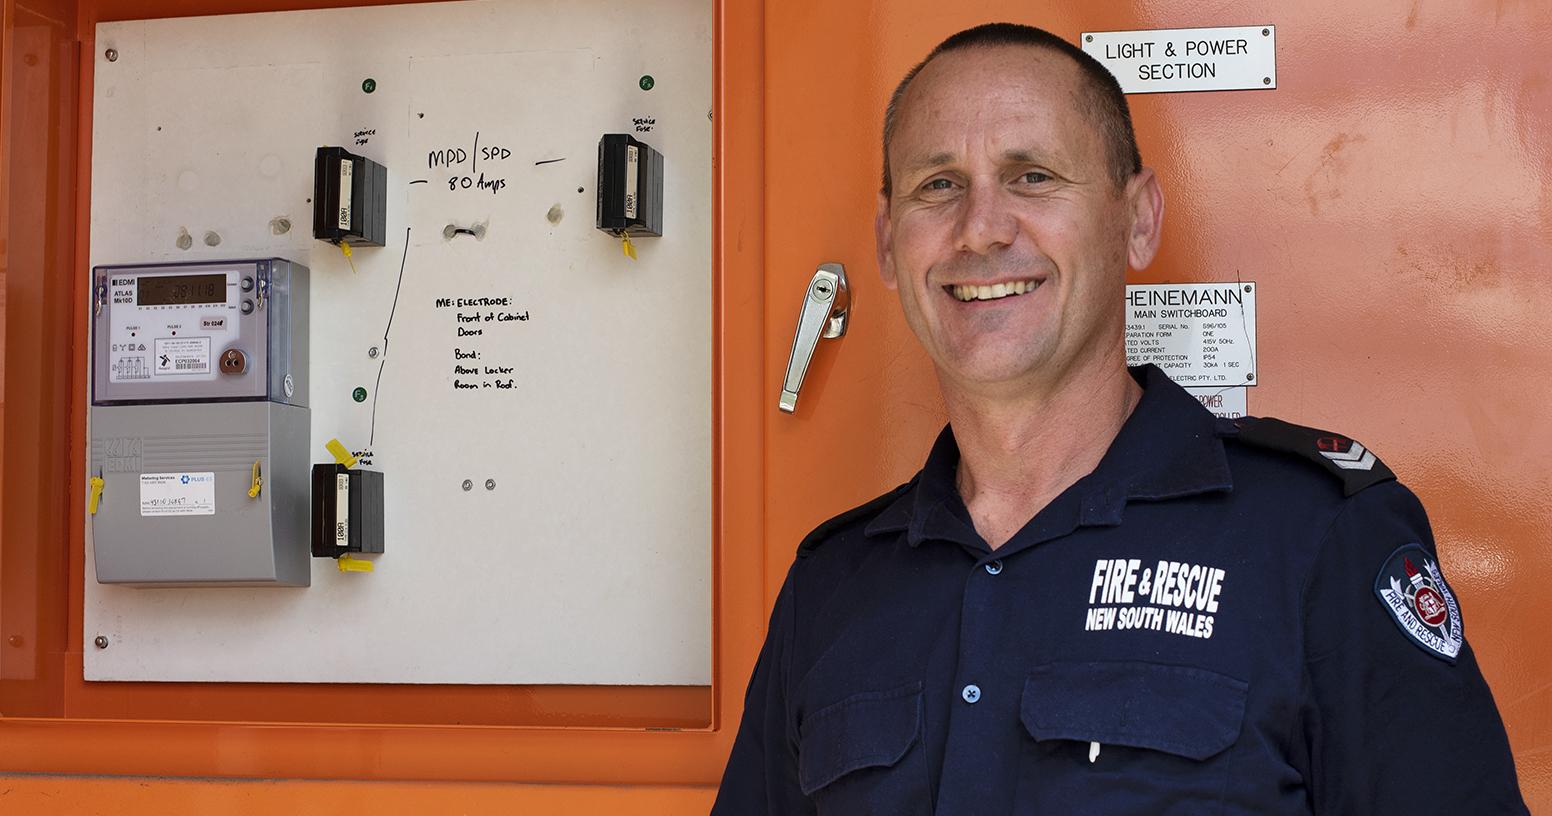 Fire fighter with smart meter at fire station